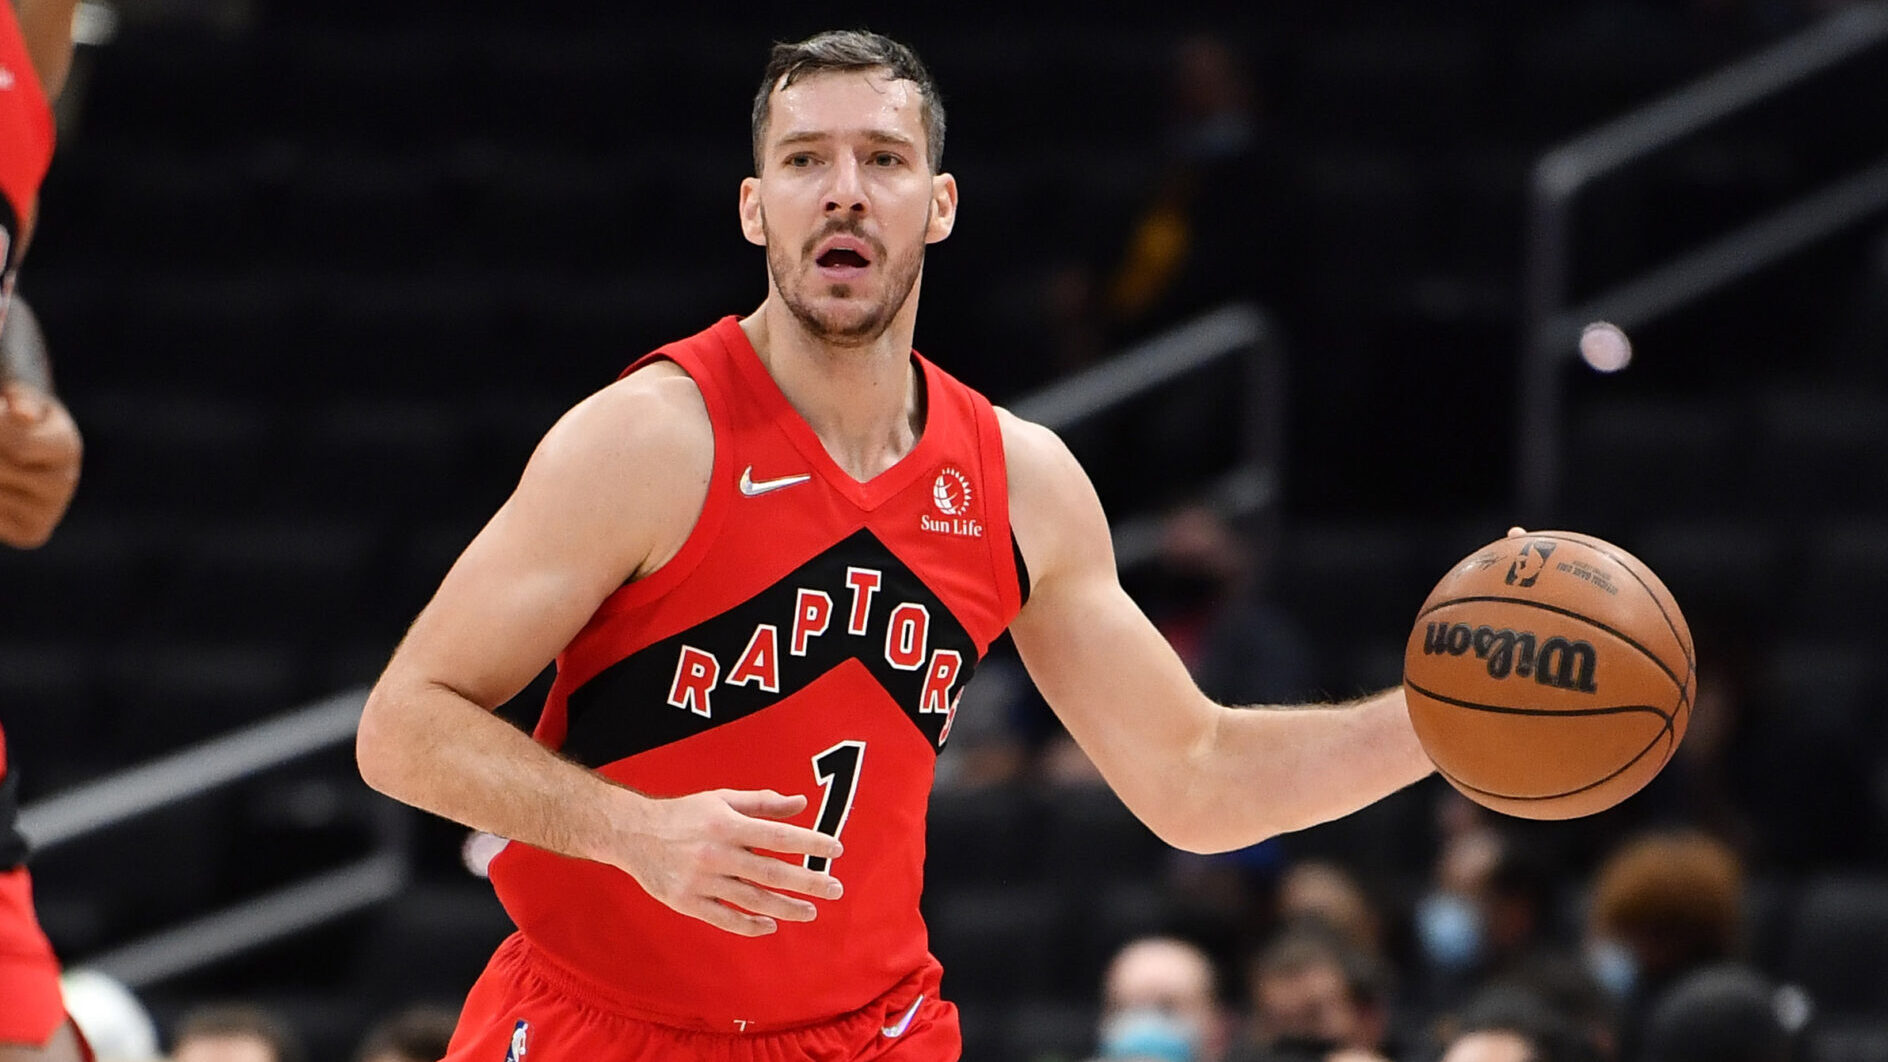 The Raptors trade Goran Dragic to the Spurs for Thaddeus Young